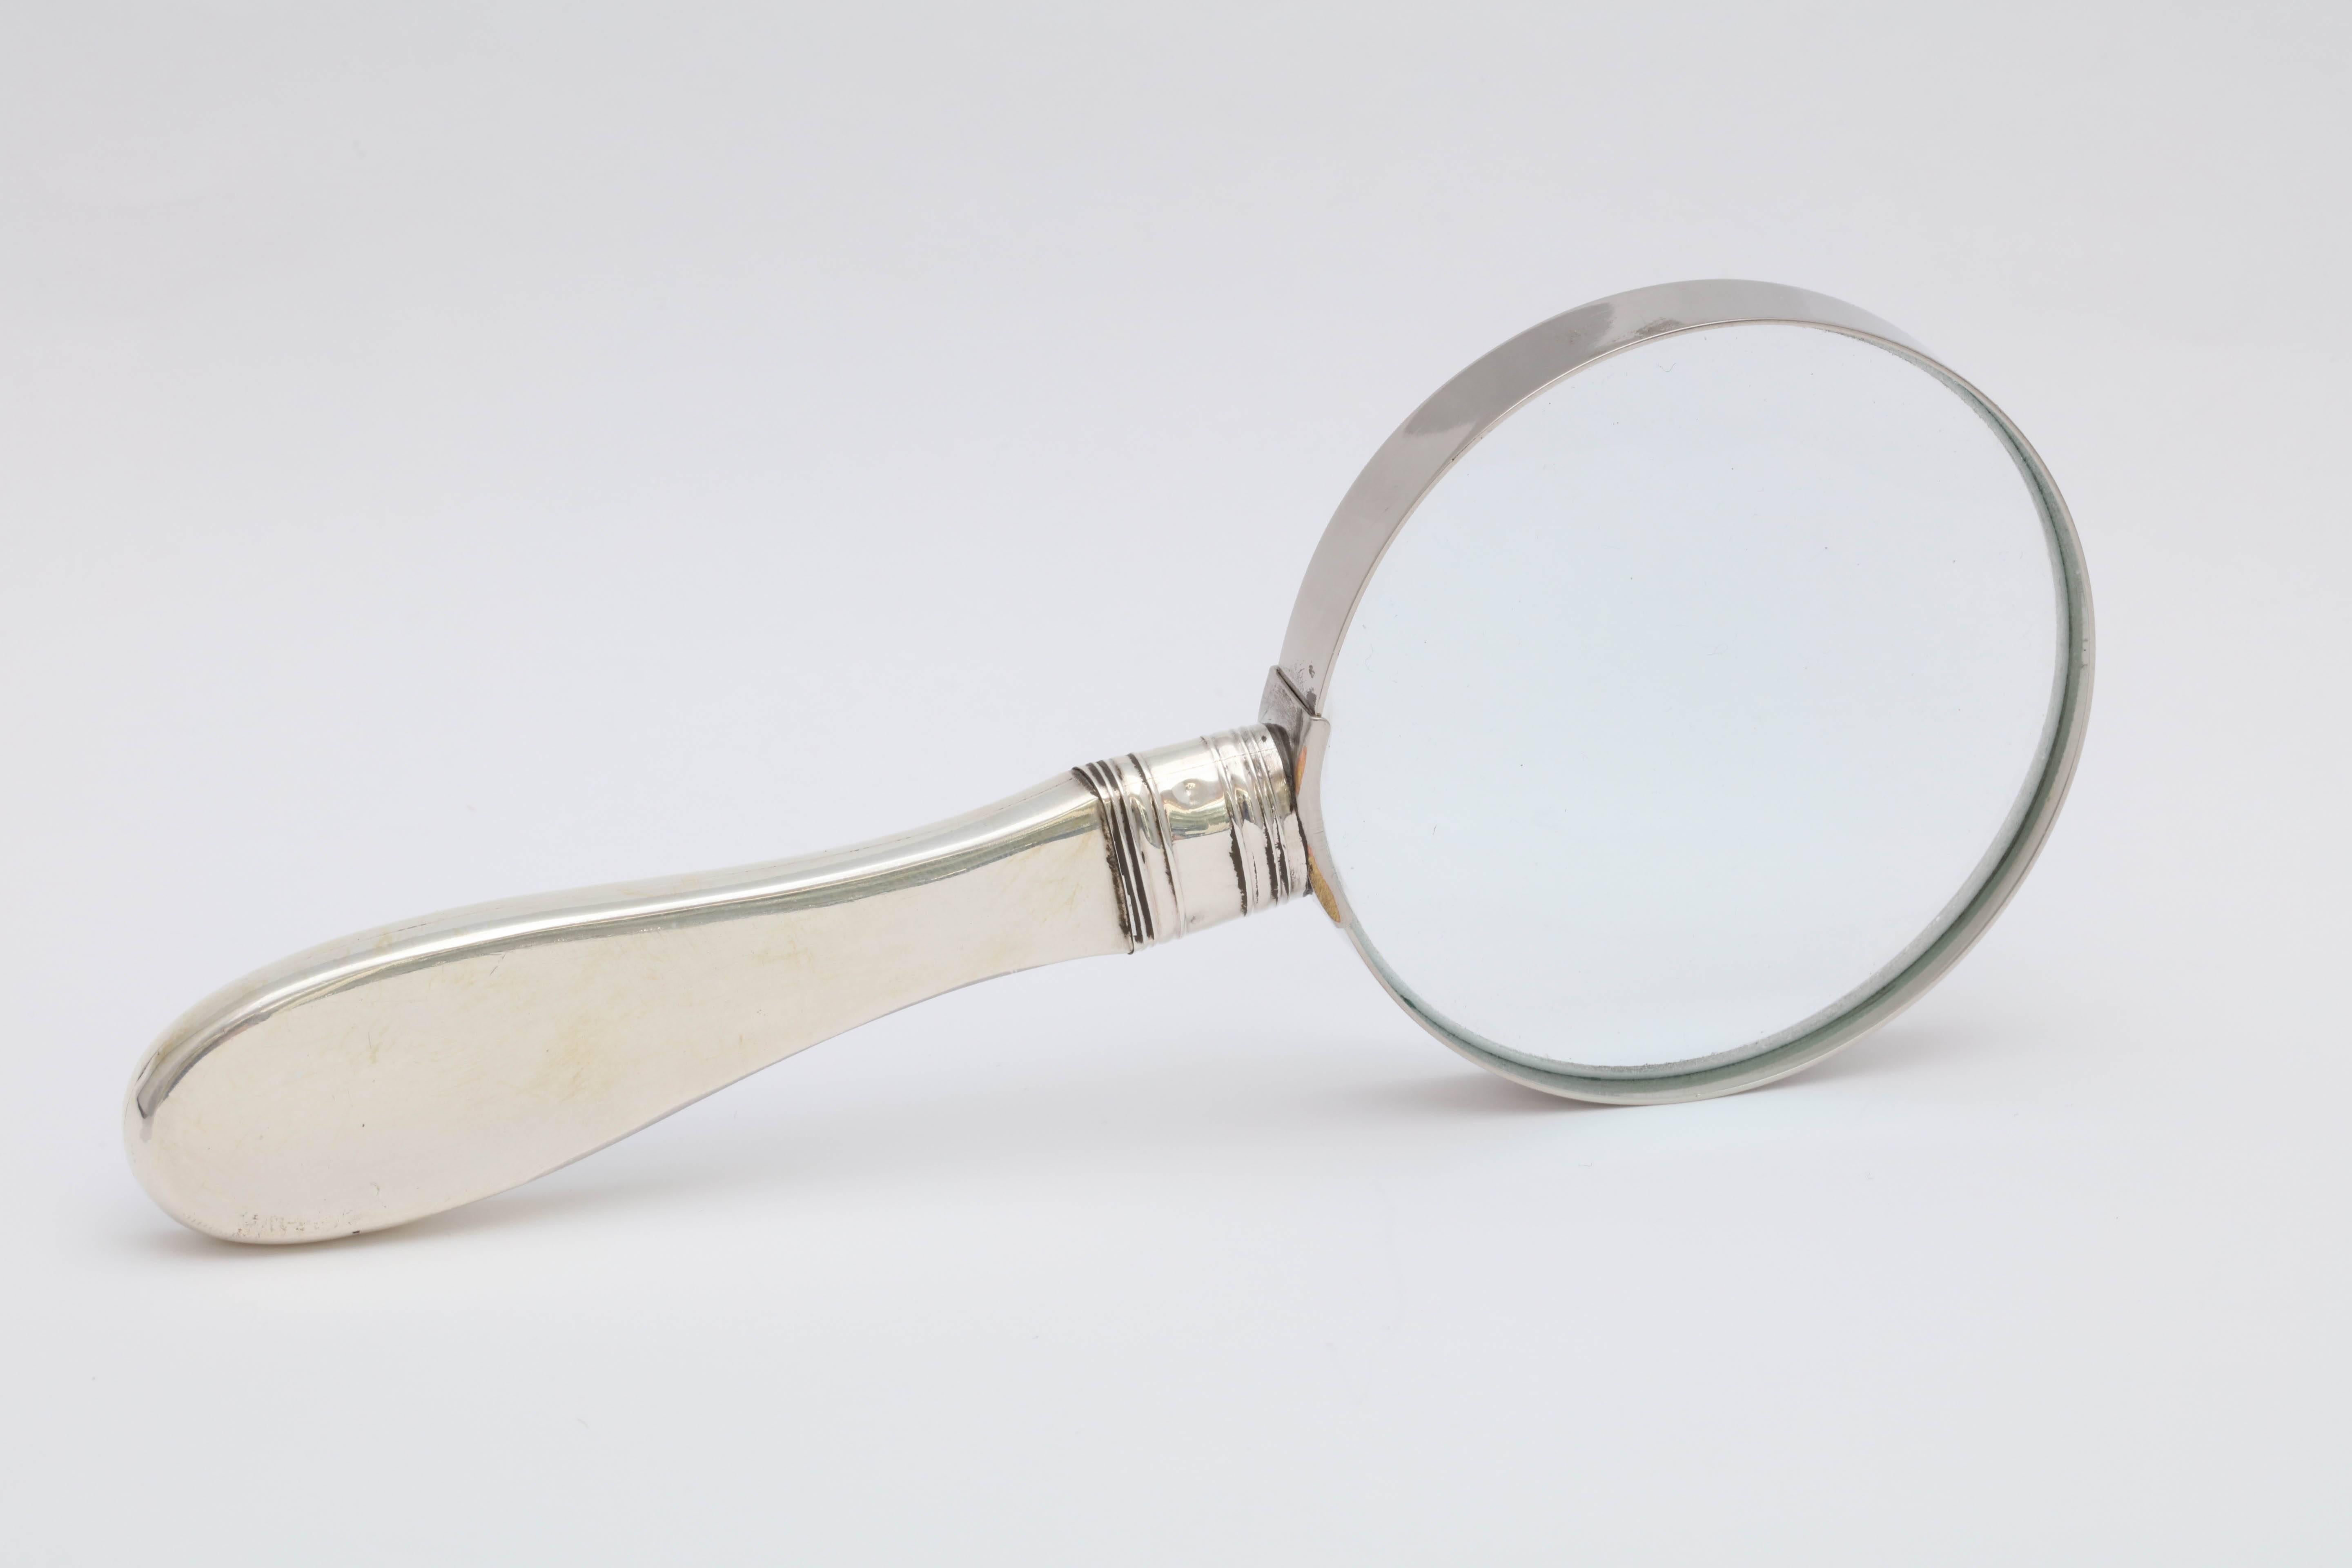 Early 20th Century Art Deco Sterling Silver and Lavender Guilloche Enamel-Mounted Magnifying Glass